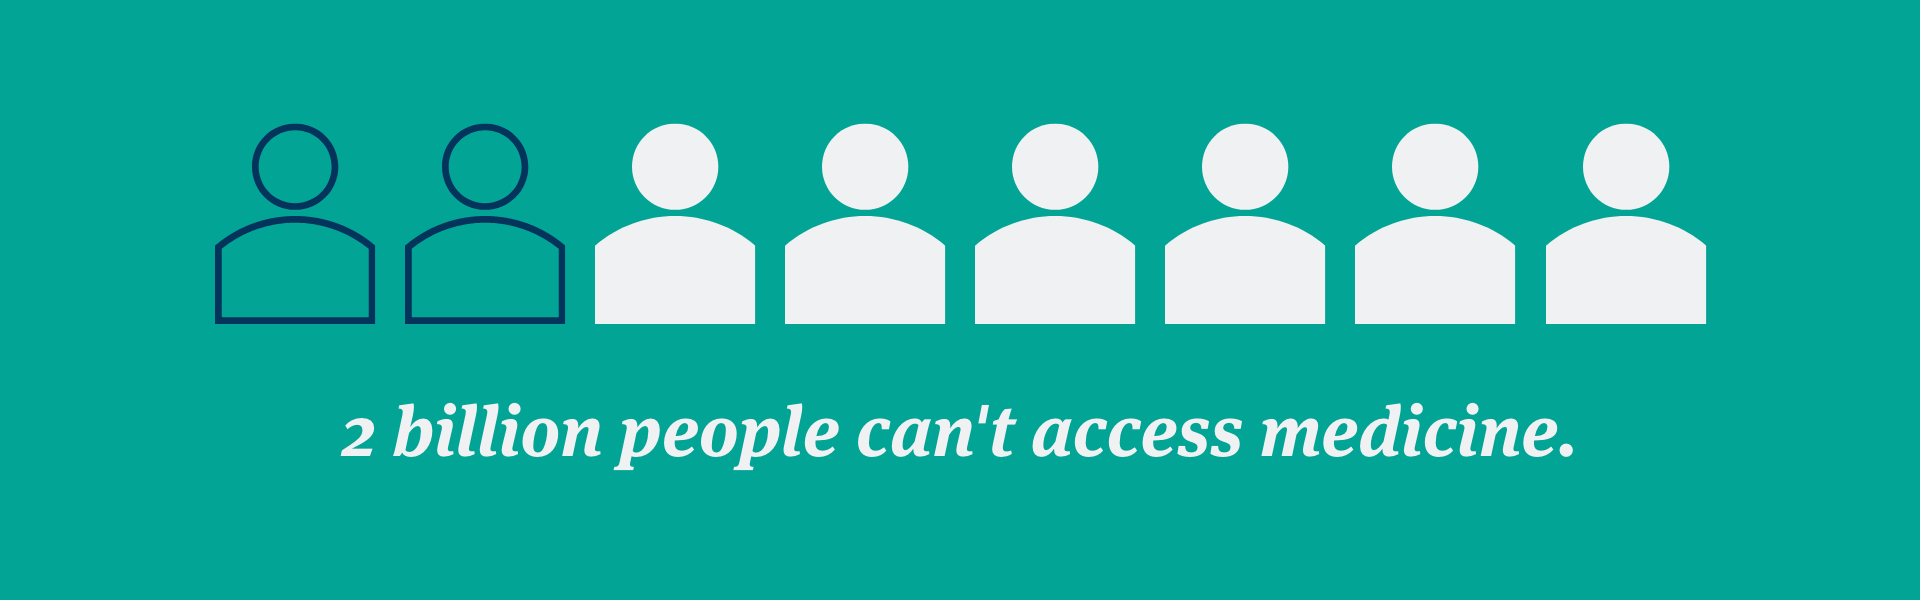 An infographic showing 2 billion people cannot access medicines